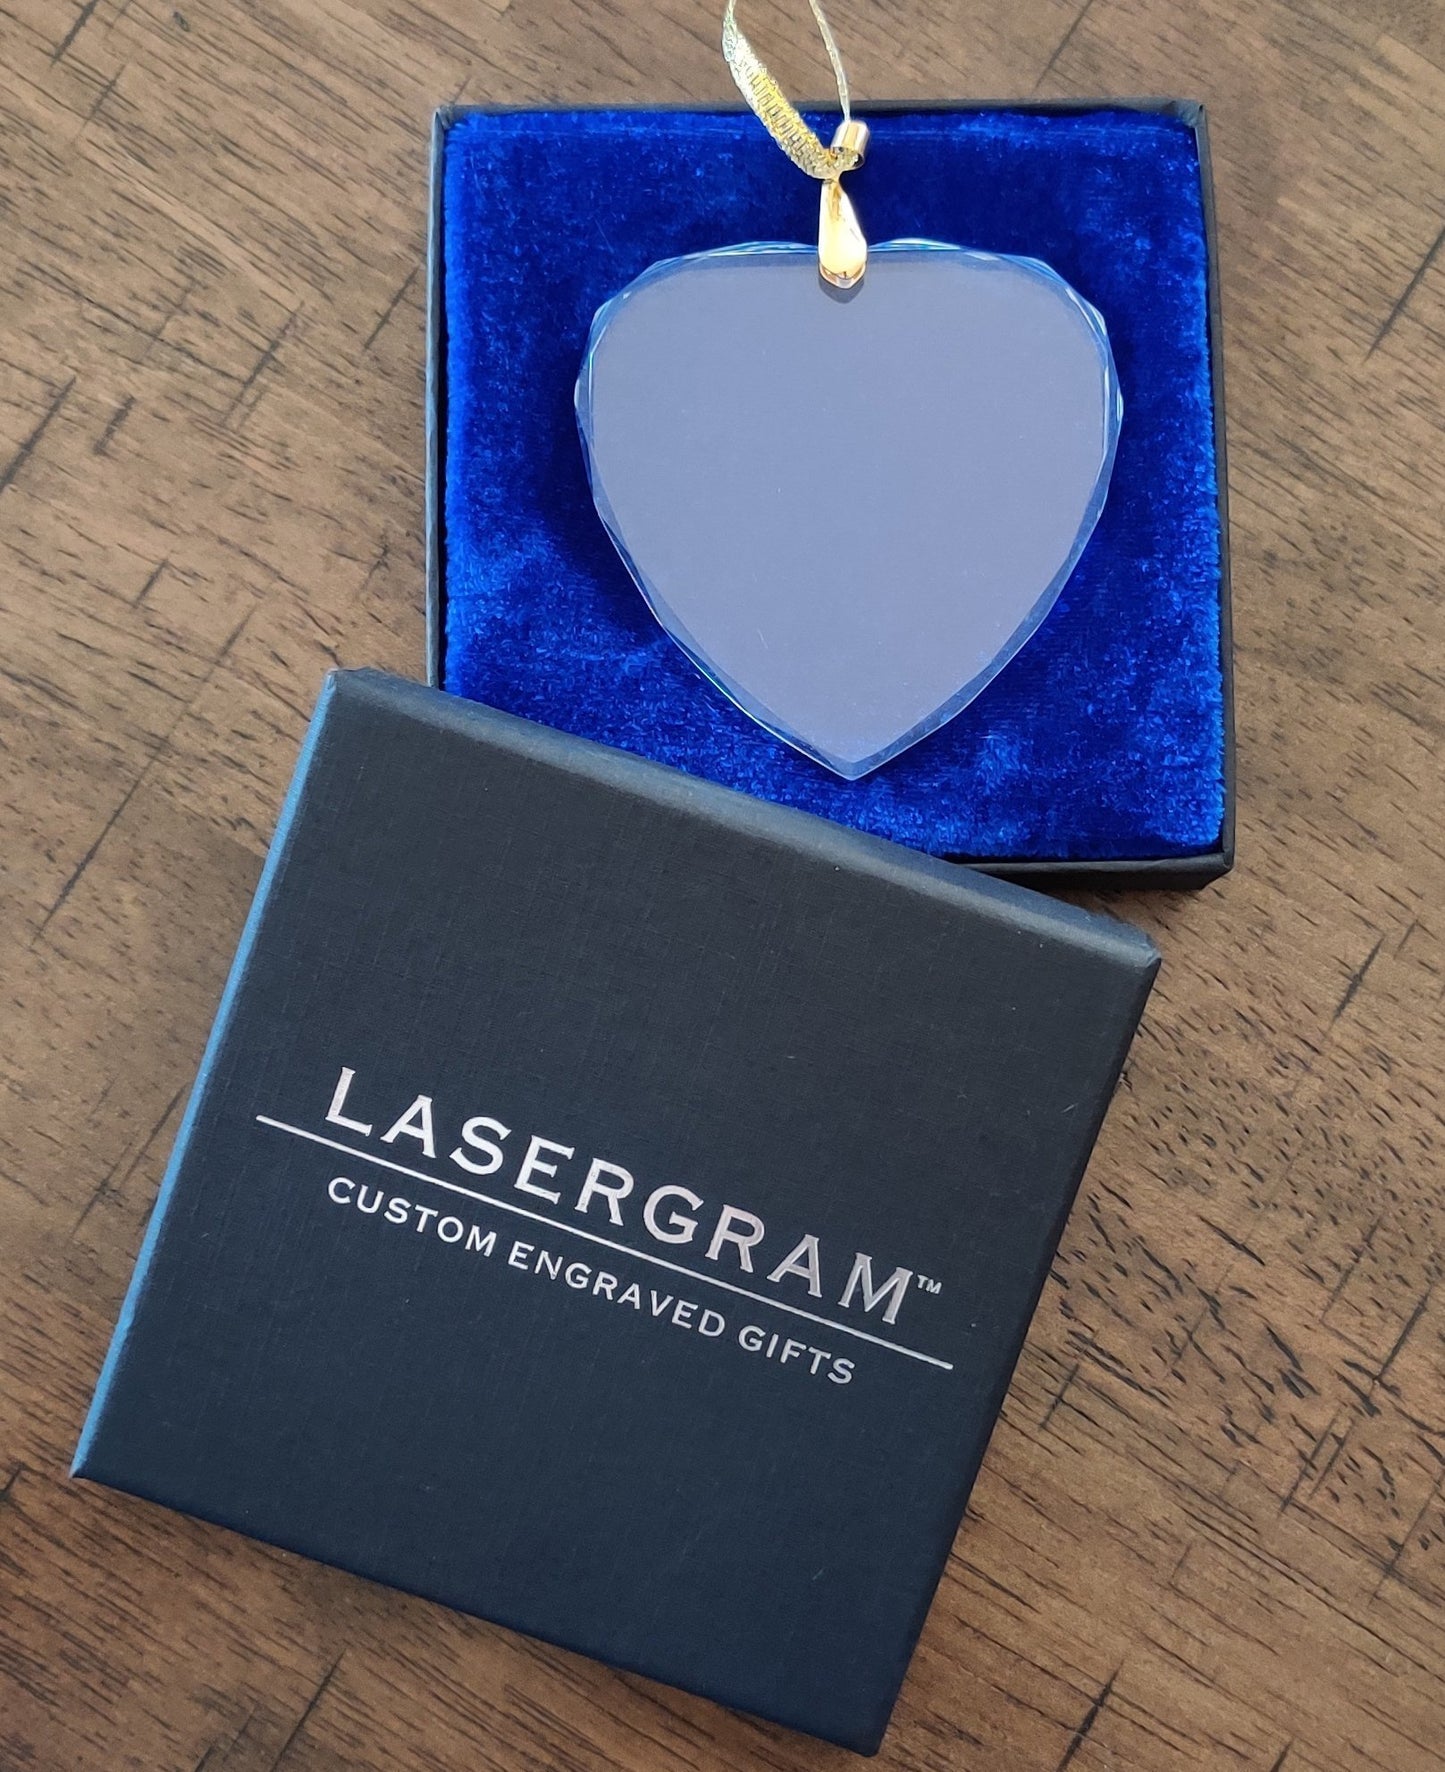 LaserGram Christmas Ornament, Zodiac Sign Cancer, Personalized Engraving Included (Heart Shape)